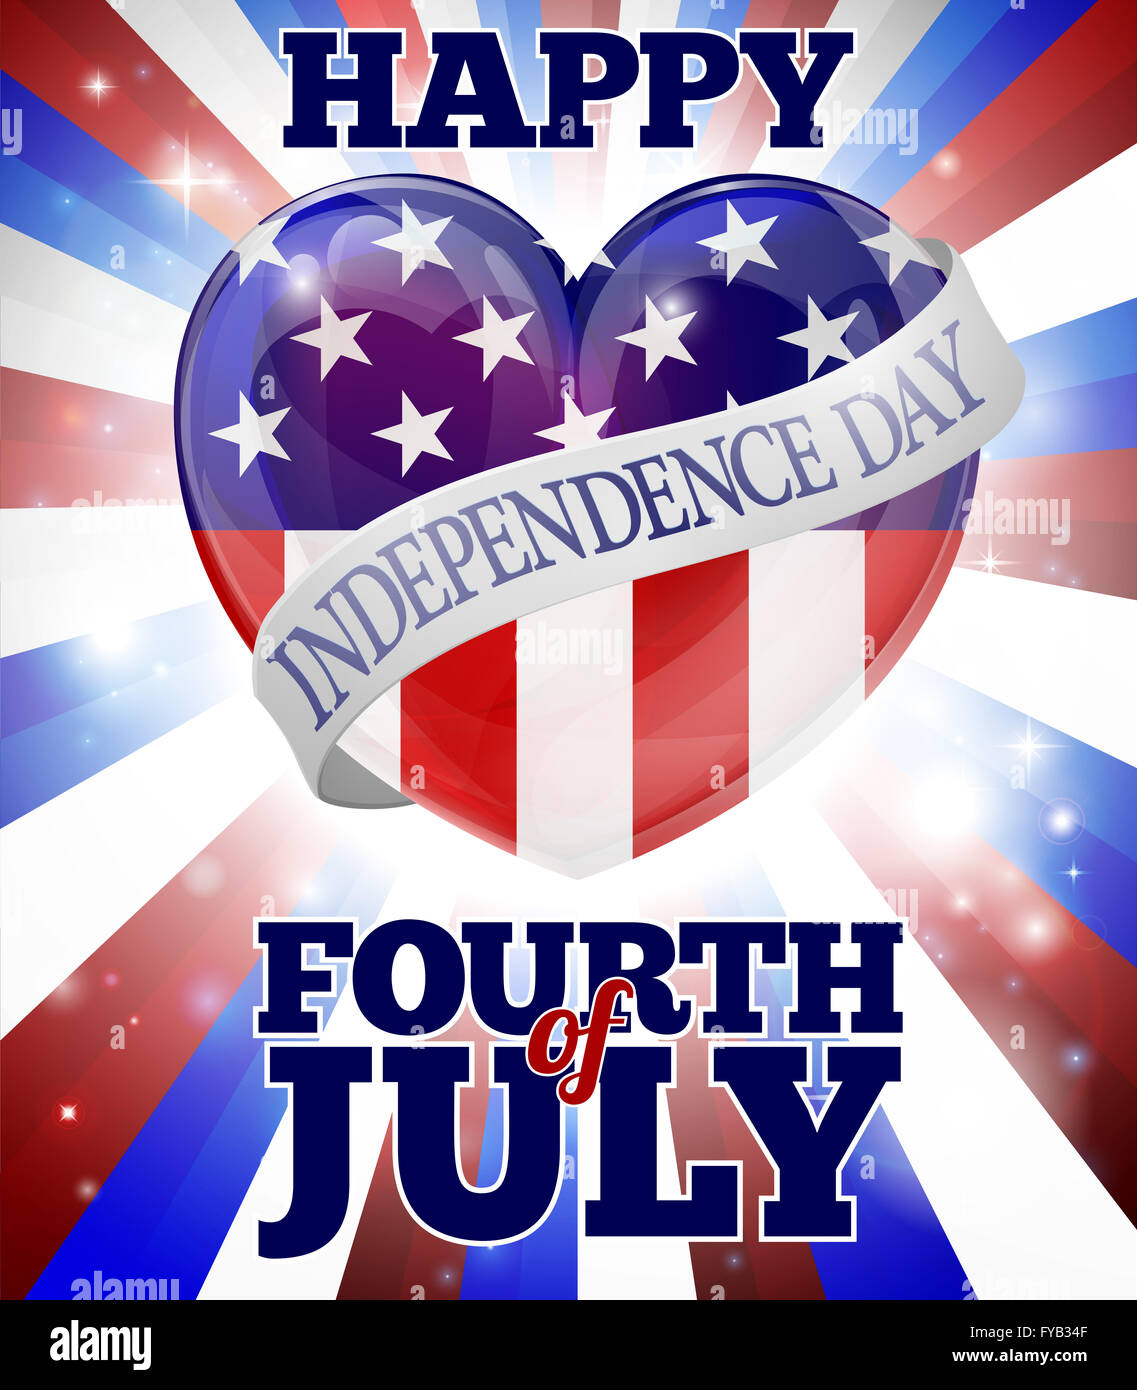 A happy Fourth of July American Independence Day heart design Stock Photo